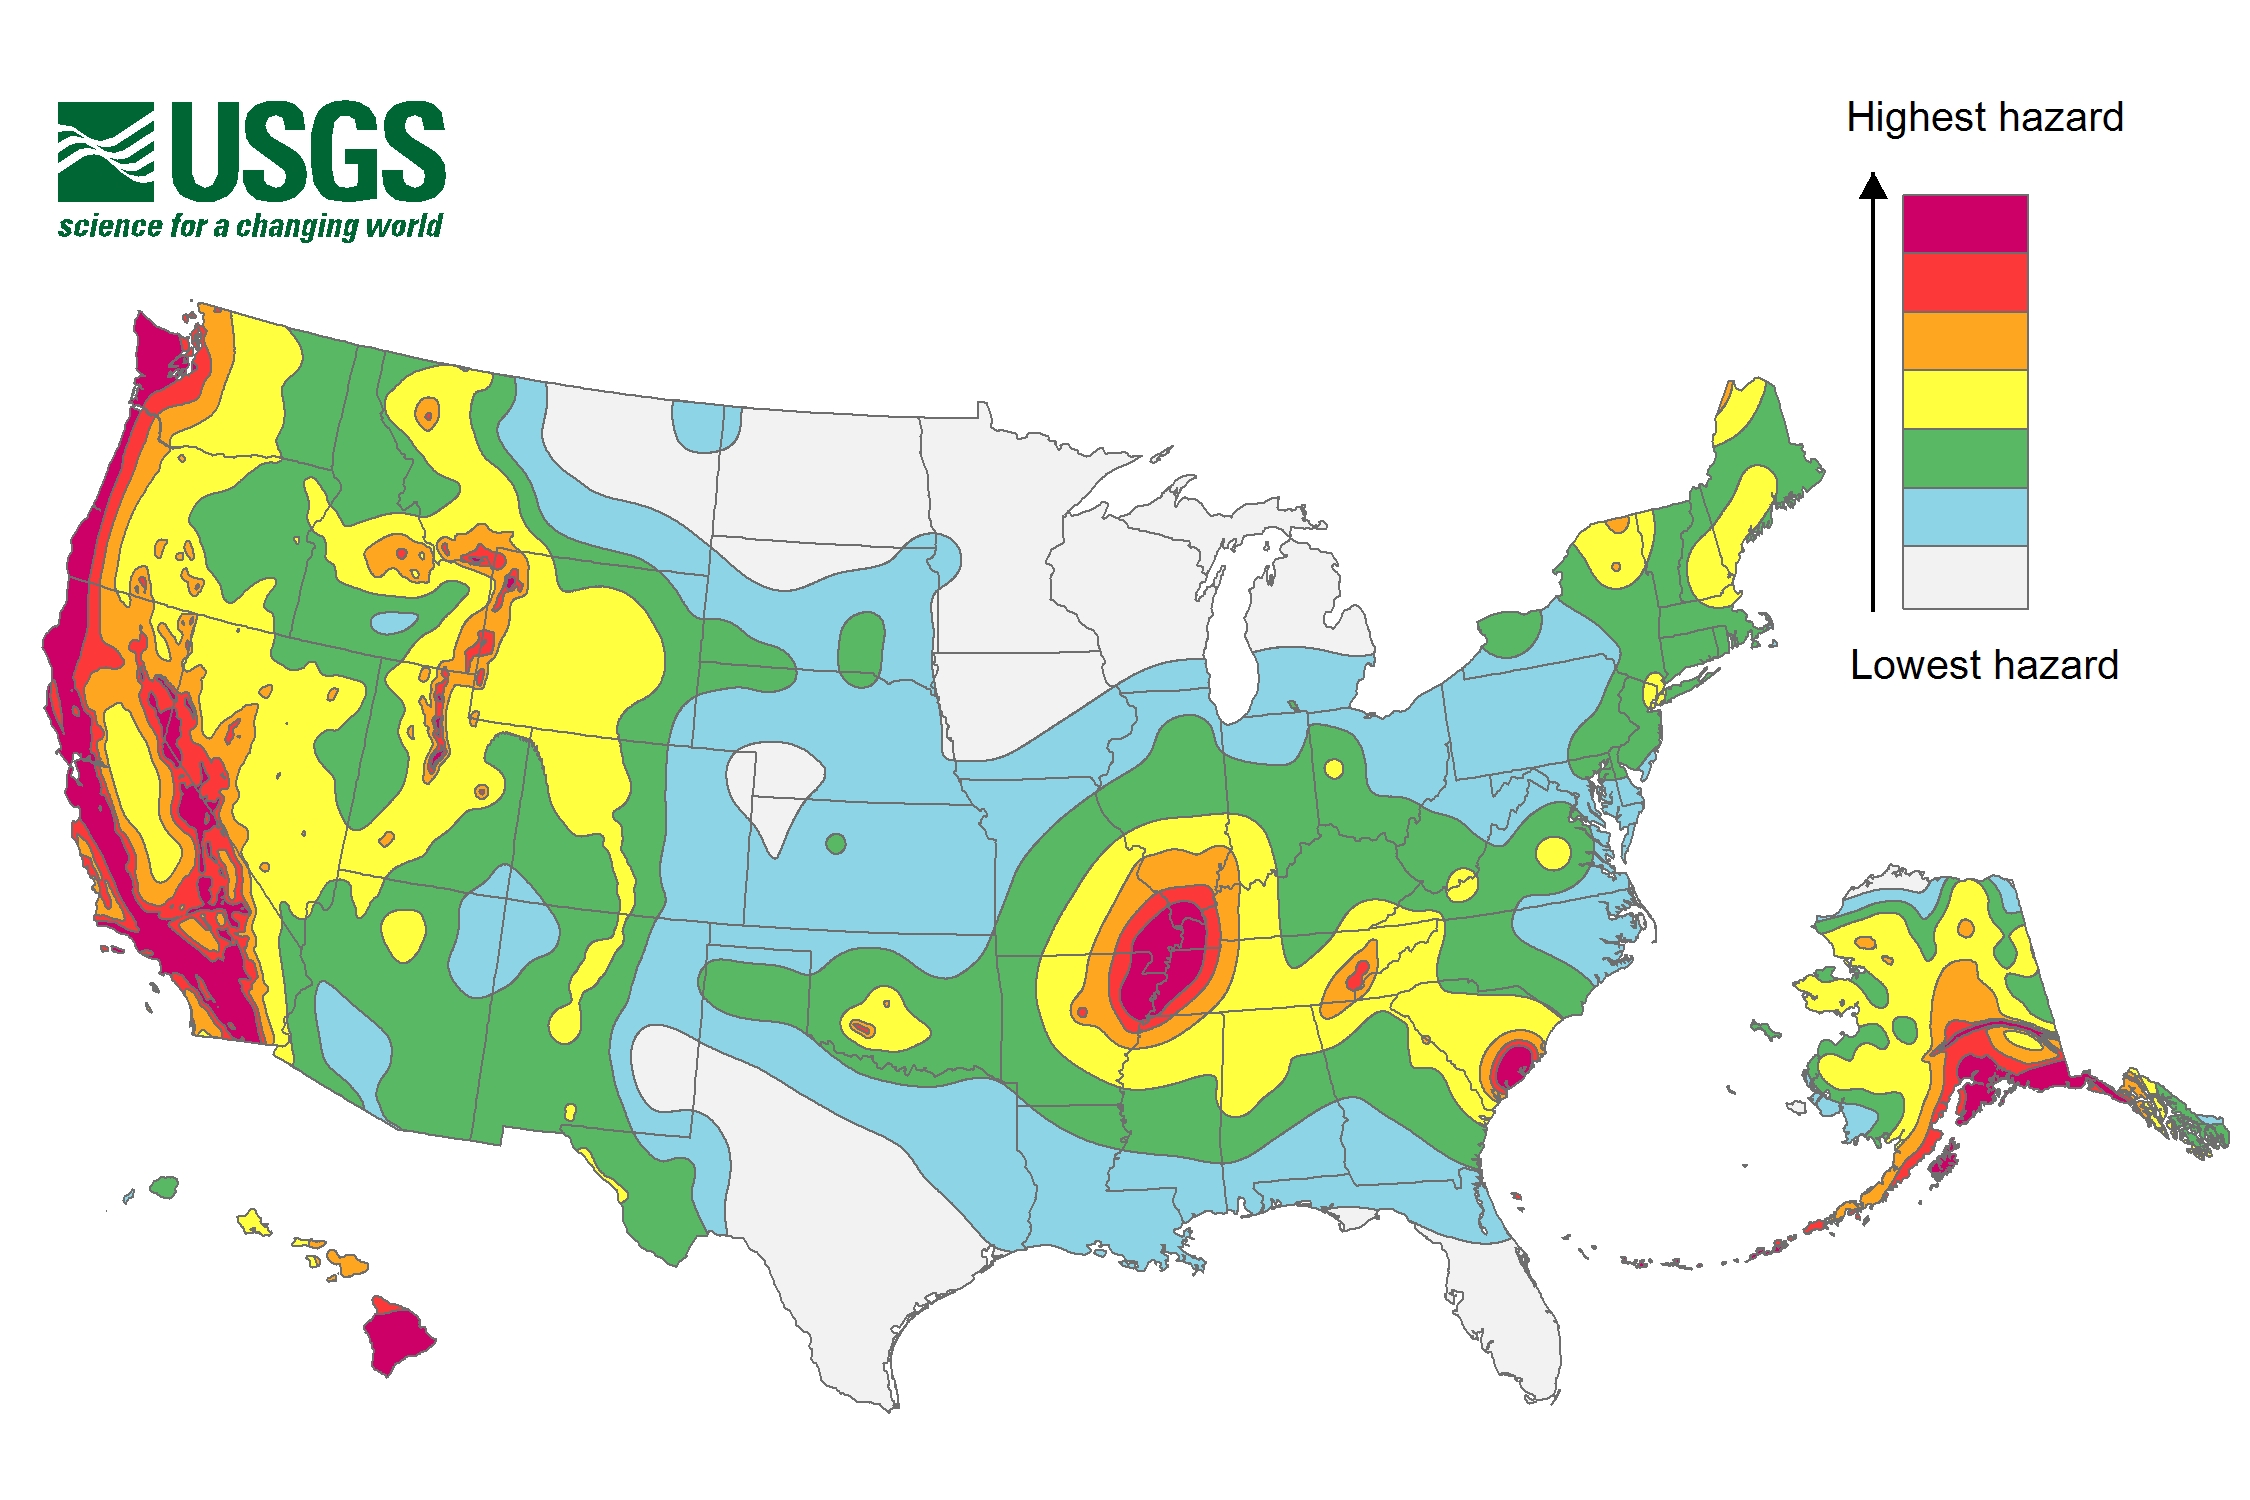 Seismic map of the 2018 International Residential Code adapted by FEMA to show Seismic Design Categories in color 